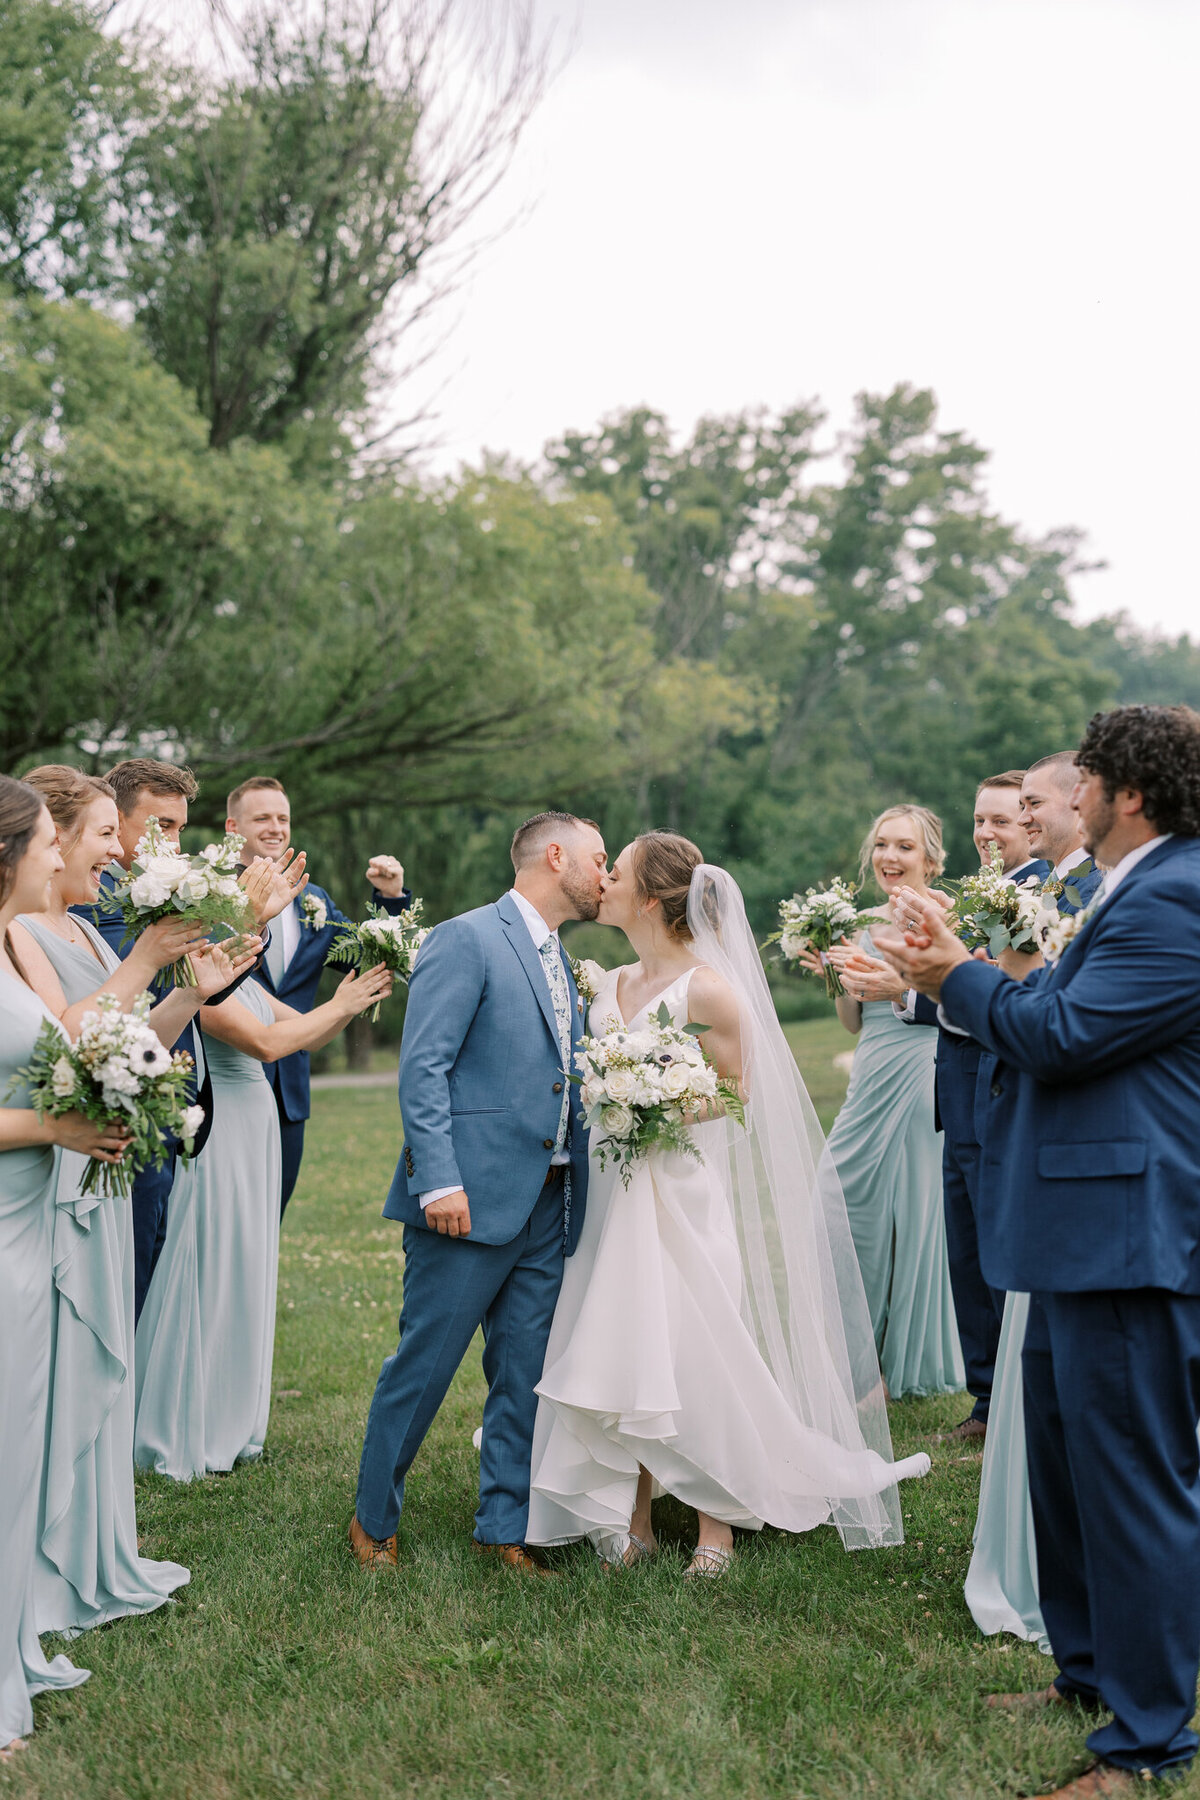 Light And Airy Wedding Photos in Pennsylvania | Ashlee Zimmerman